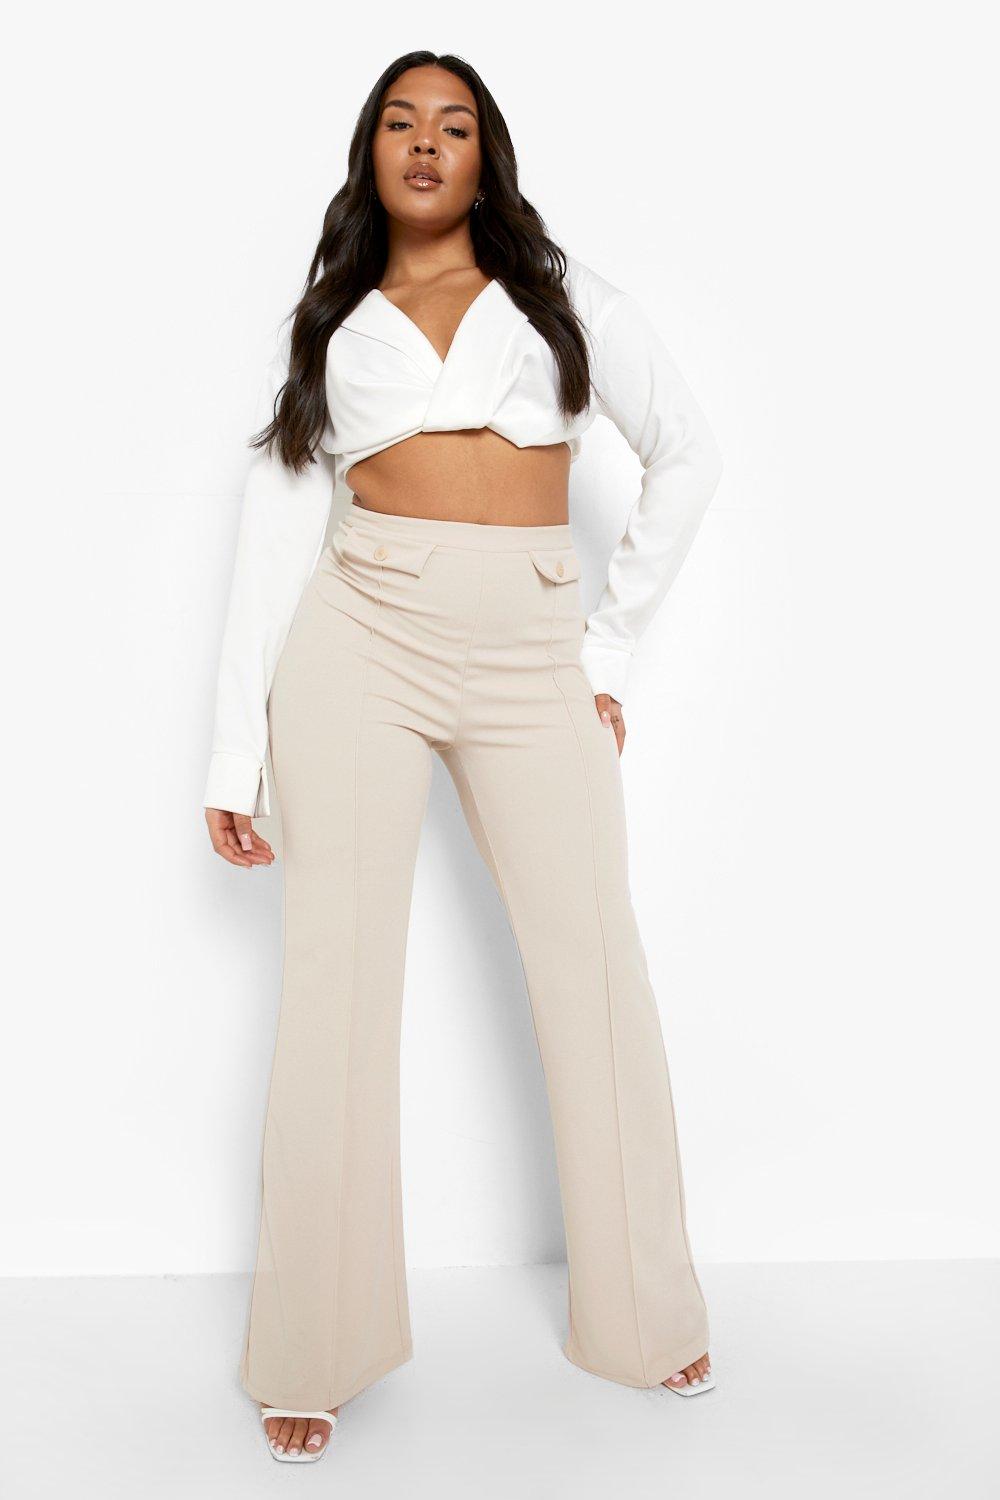 Women Cropped Pants With Pockets Womens Relaxed Fit Pants Suitable For  Formal Daily Party Ball